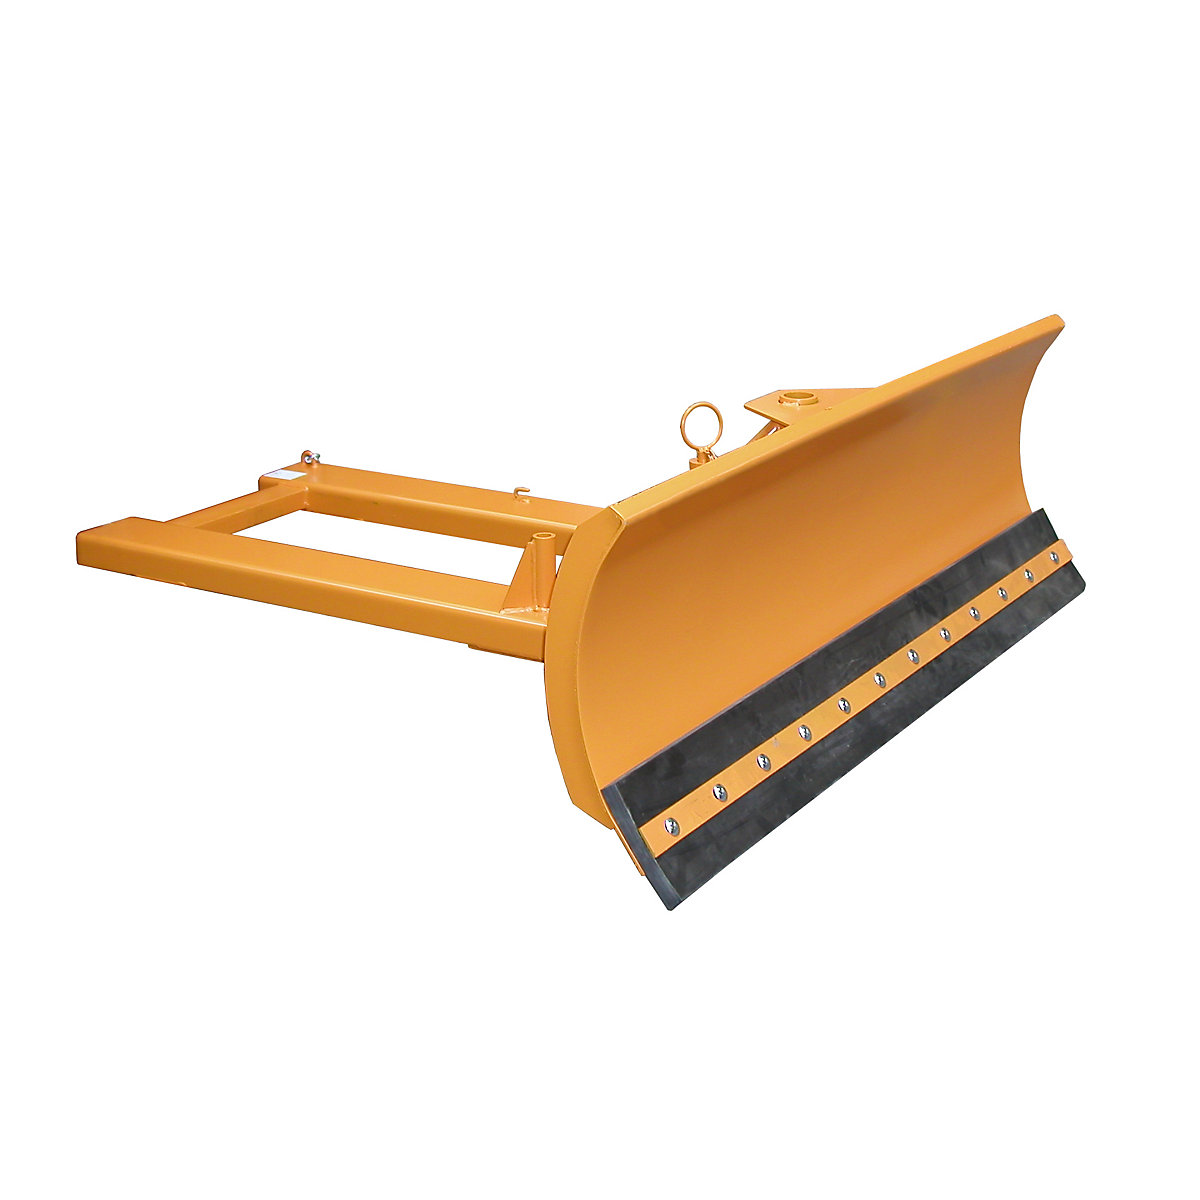 Snow plough for forklifts – eurokraft pro, rubber scraping edge, blade width 1800 mm